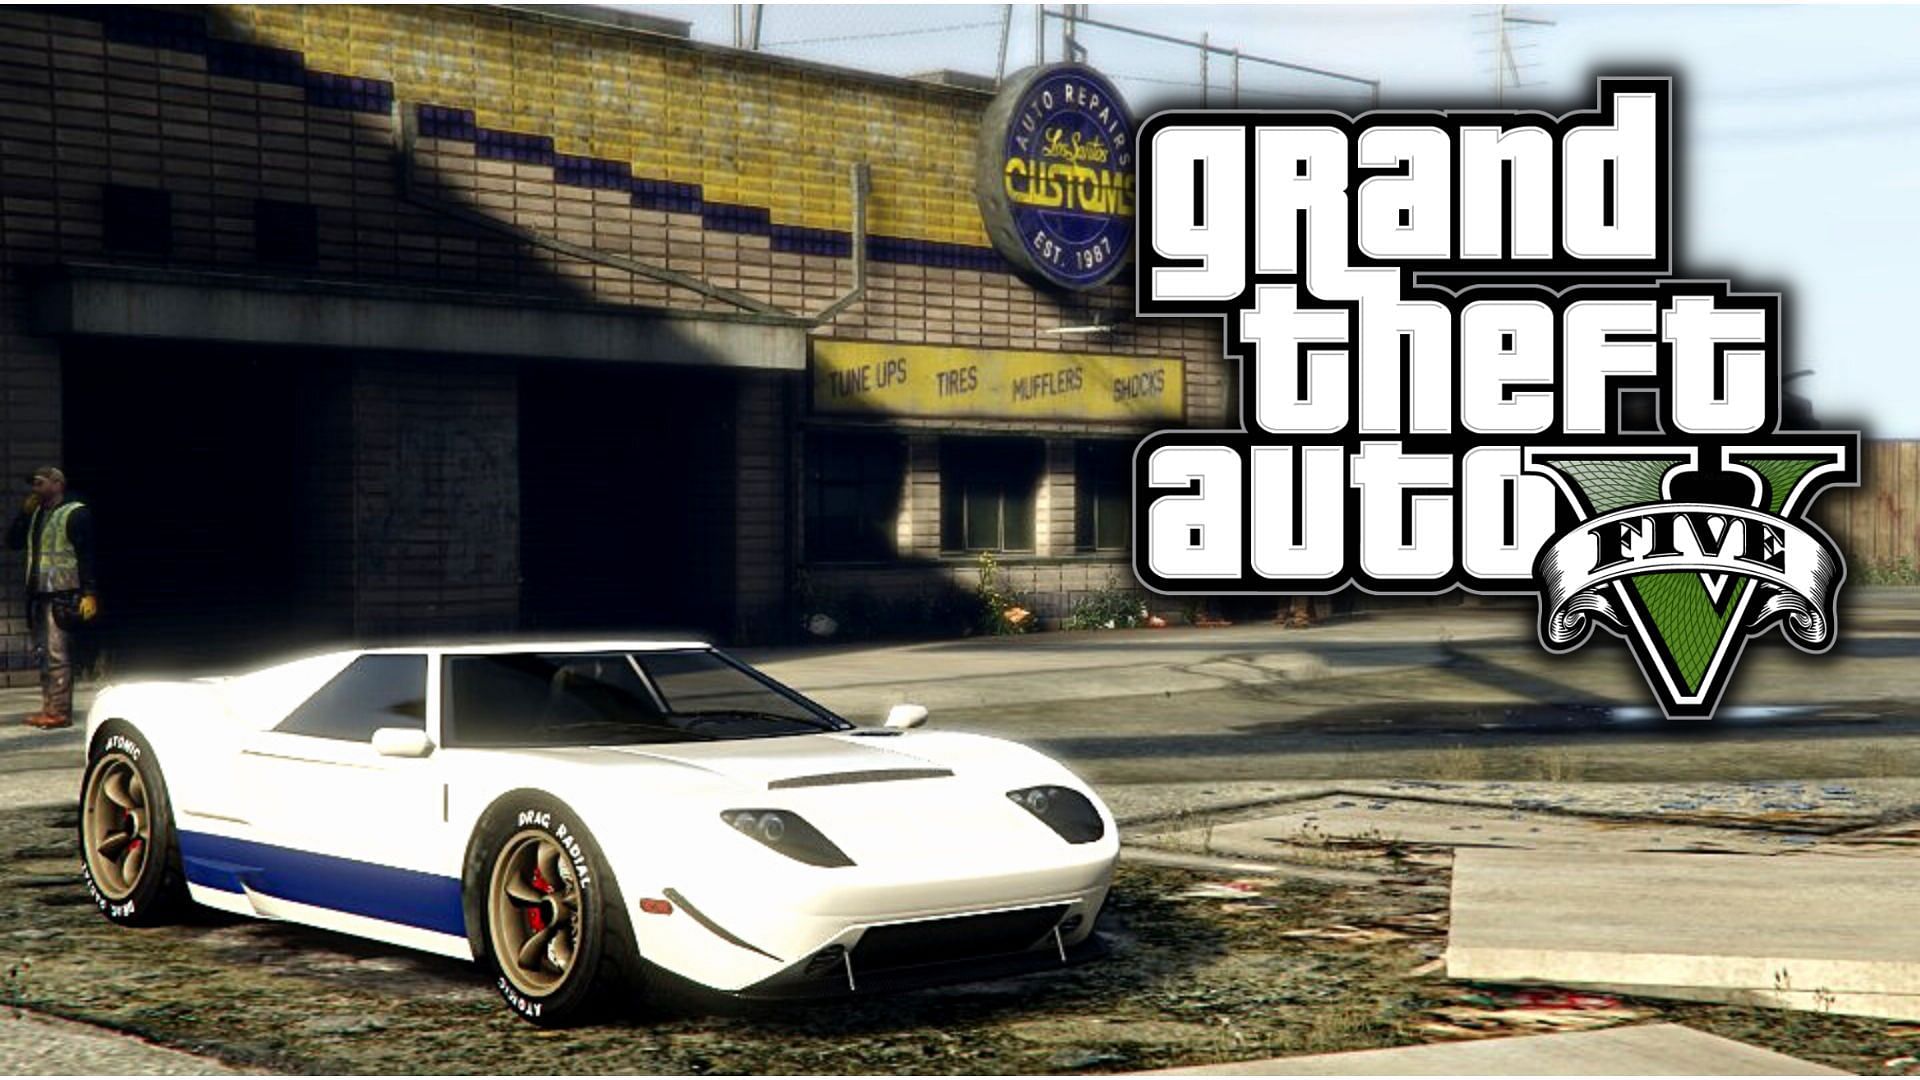 A picture of the Vapid Bullet super car in GTA 5 story mode (Image via Mattoropael on GTAForums)